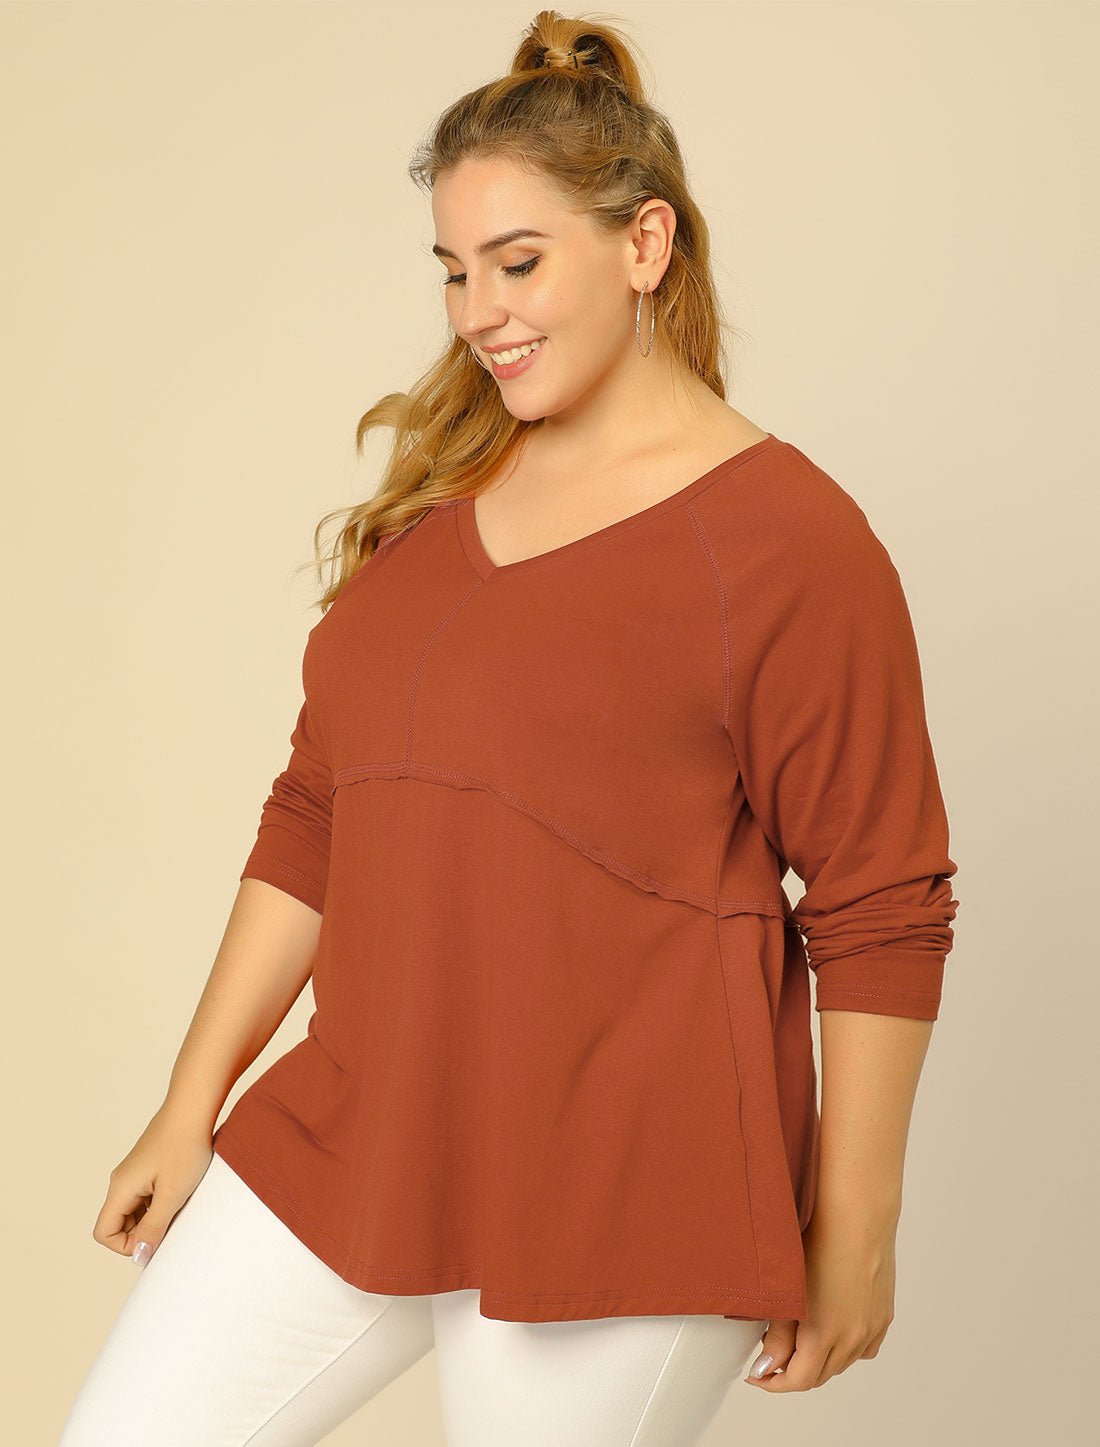 Bublédon Plus Size Casual Round Neck Swing Long Sleeves Trim Knit Top